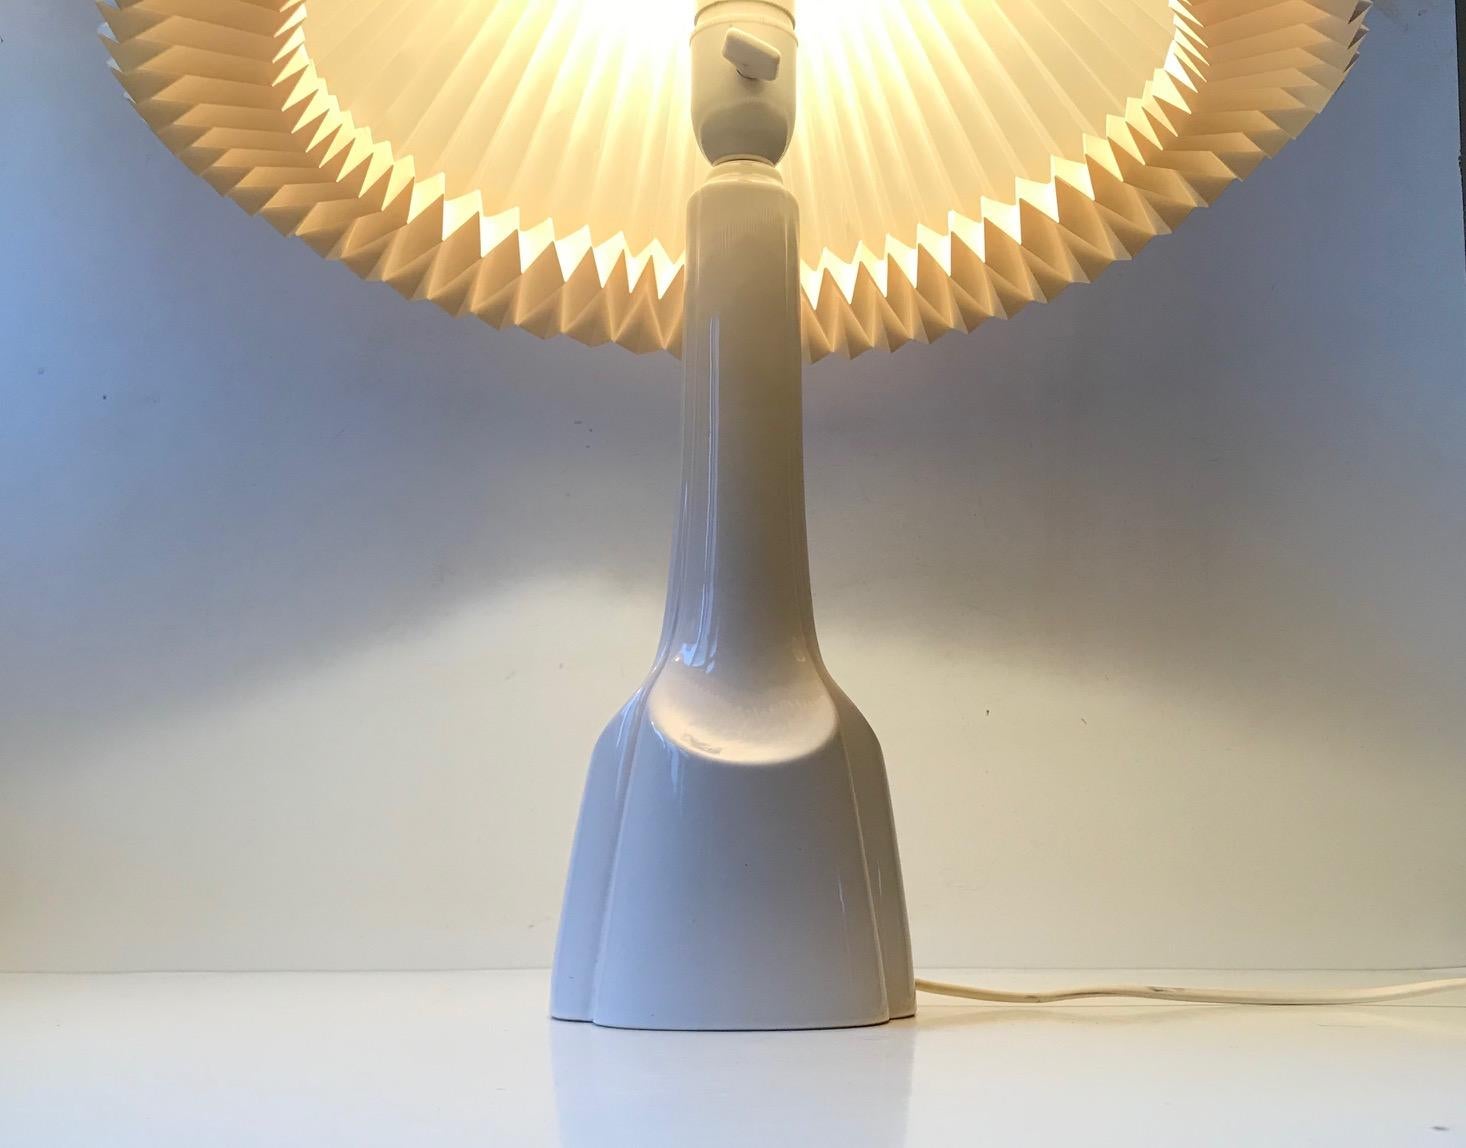 Danish pottery table lamp with a dens white glaze. Stylized architectural shape with soft balanced lines. This particular one was manufactured by Søholm in Denmark during the 1970s. It features its original socket with practical on/off switch.